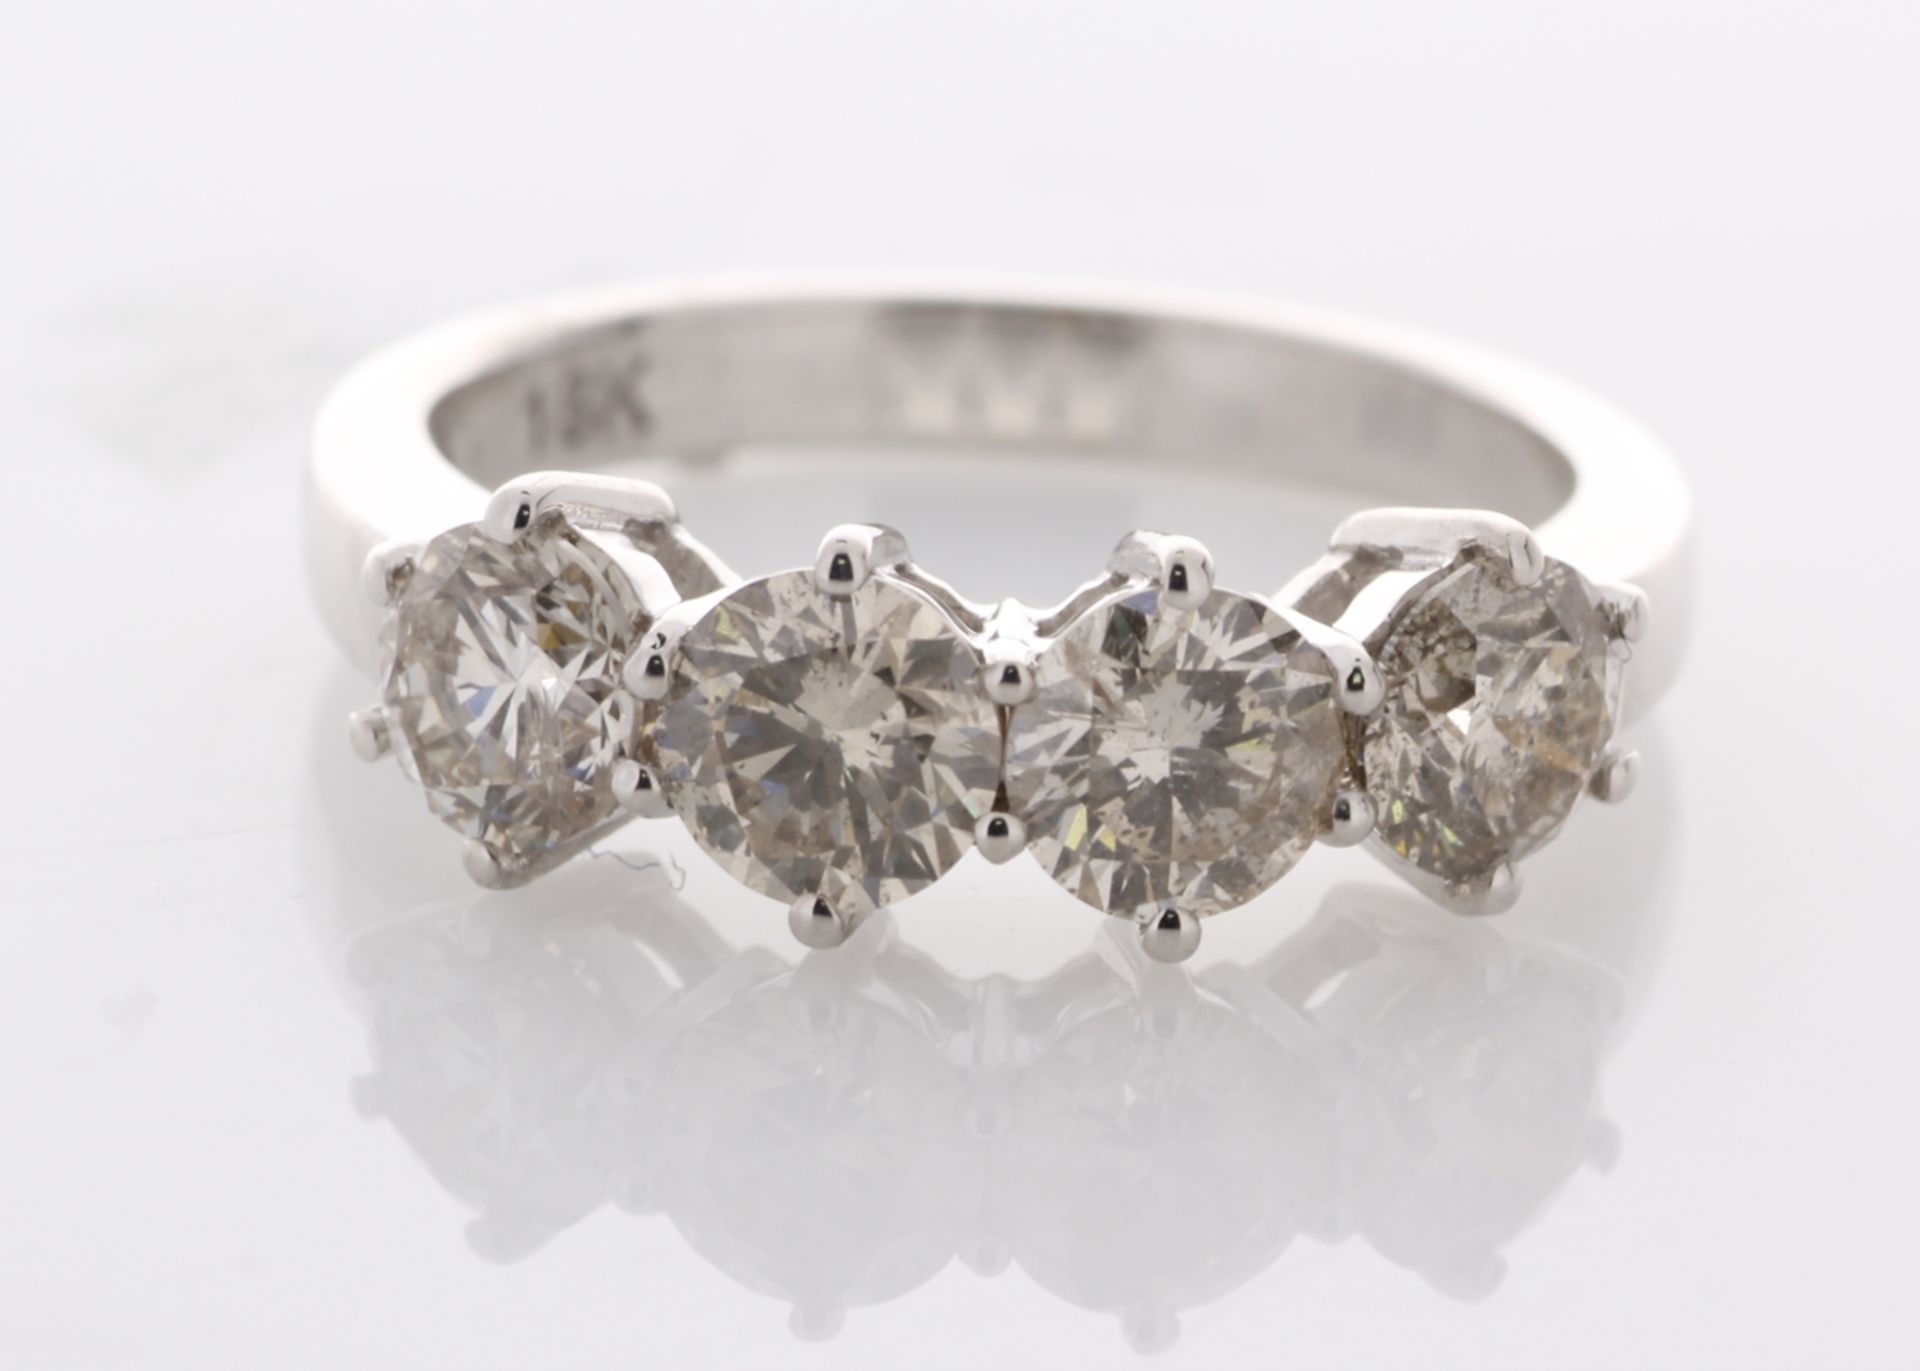 Valued by GIE £21,455.00 - 18ct White Gold Four Stone Claw Set Diamond Ring 2.10 Carats - 3145004, - Image 5 of 6